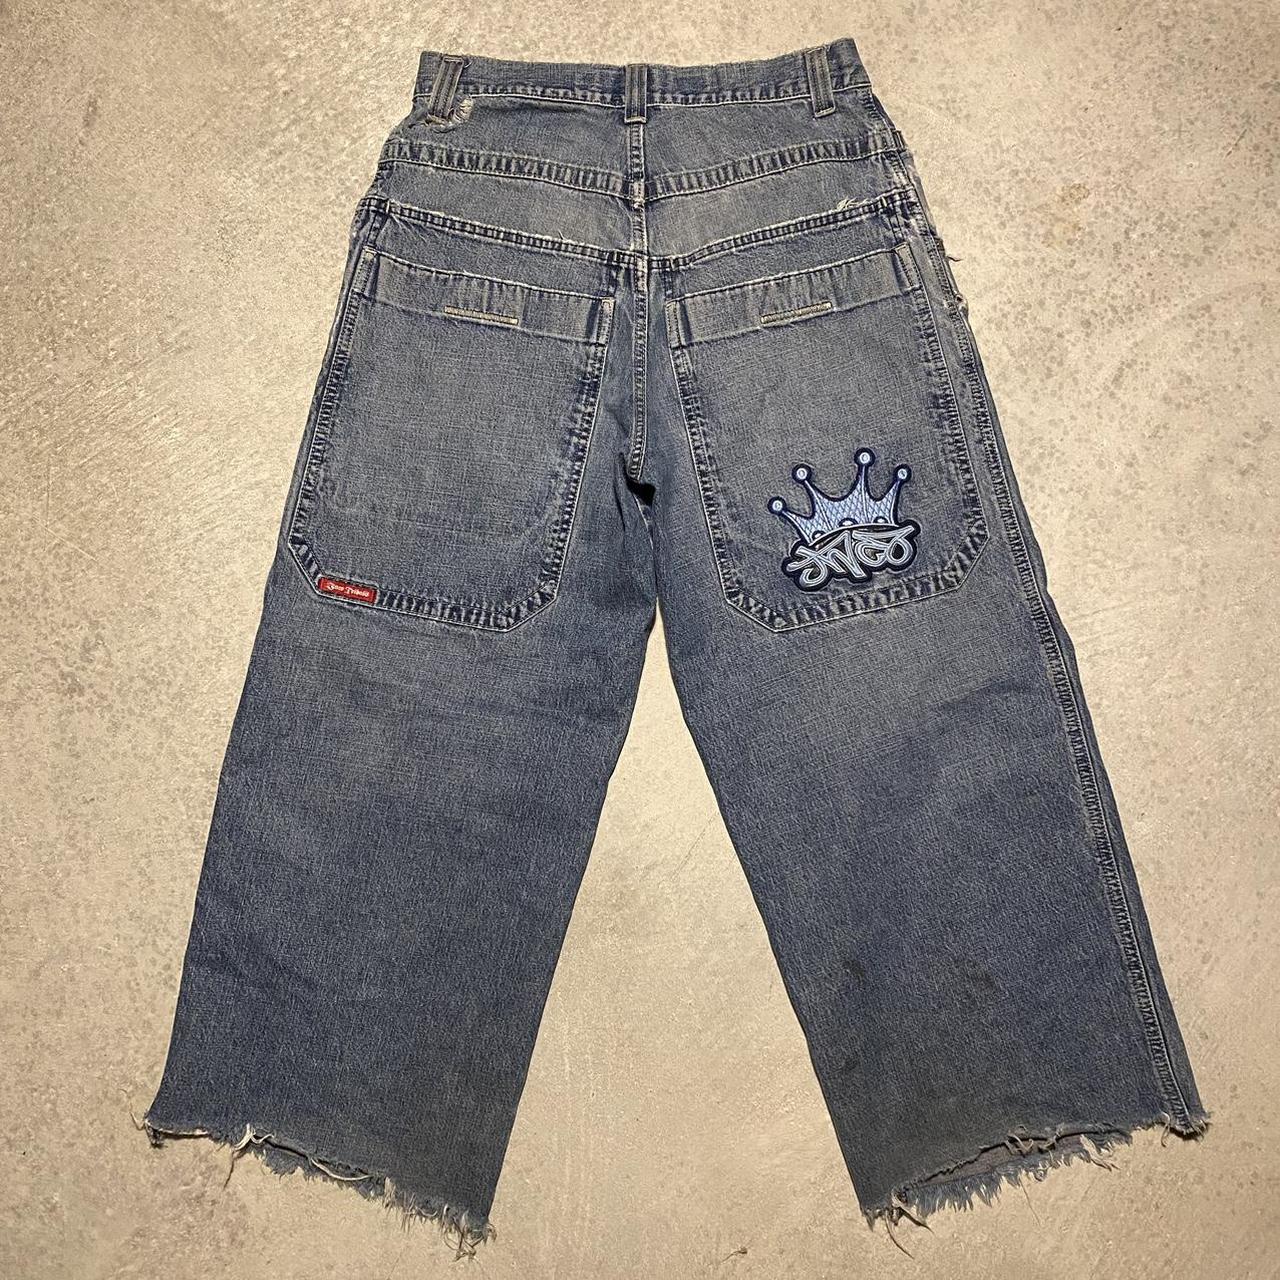 Grail Jnco Tribal Jeans (Size 32x28) ‼️DO NO BUT THIS... - Depop